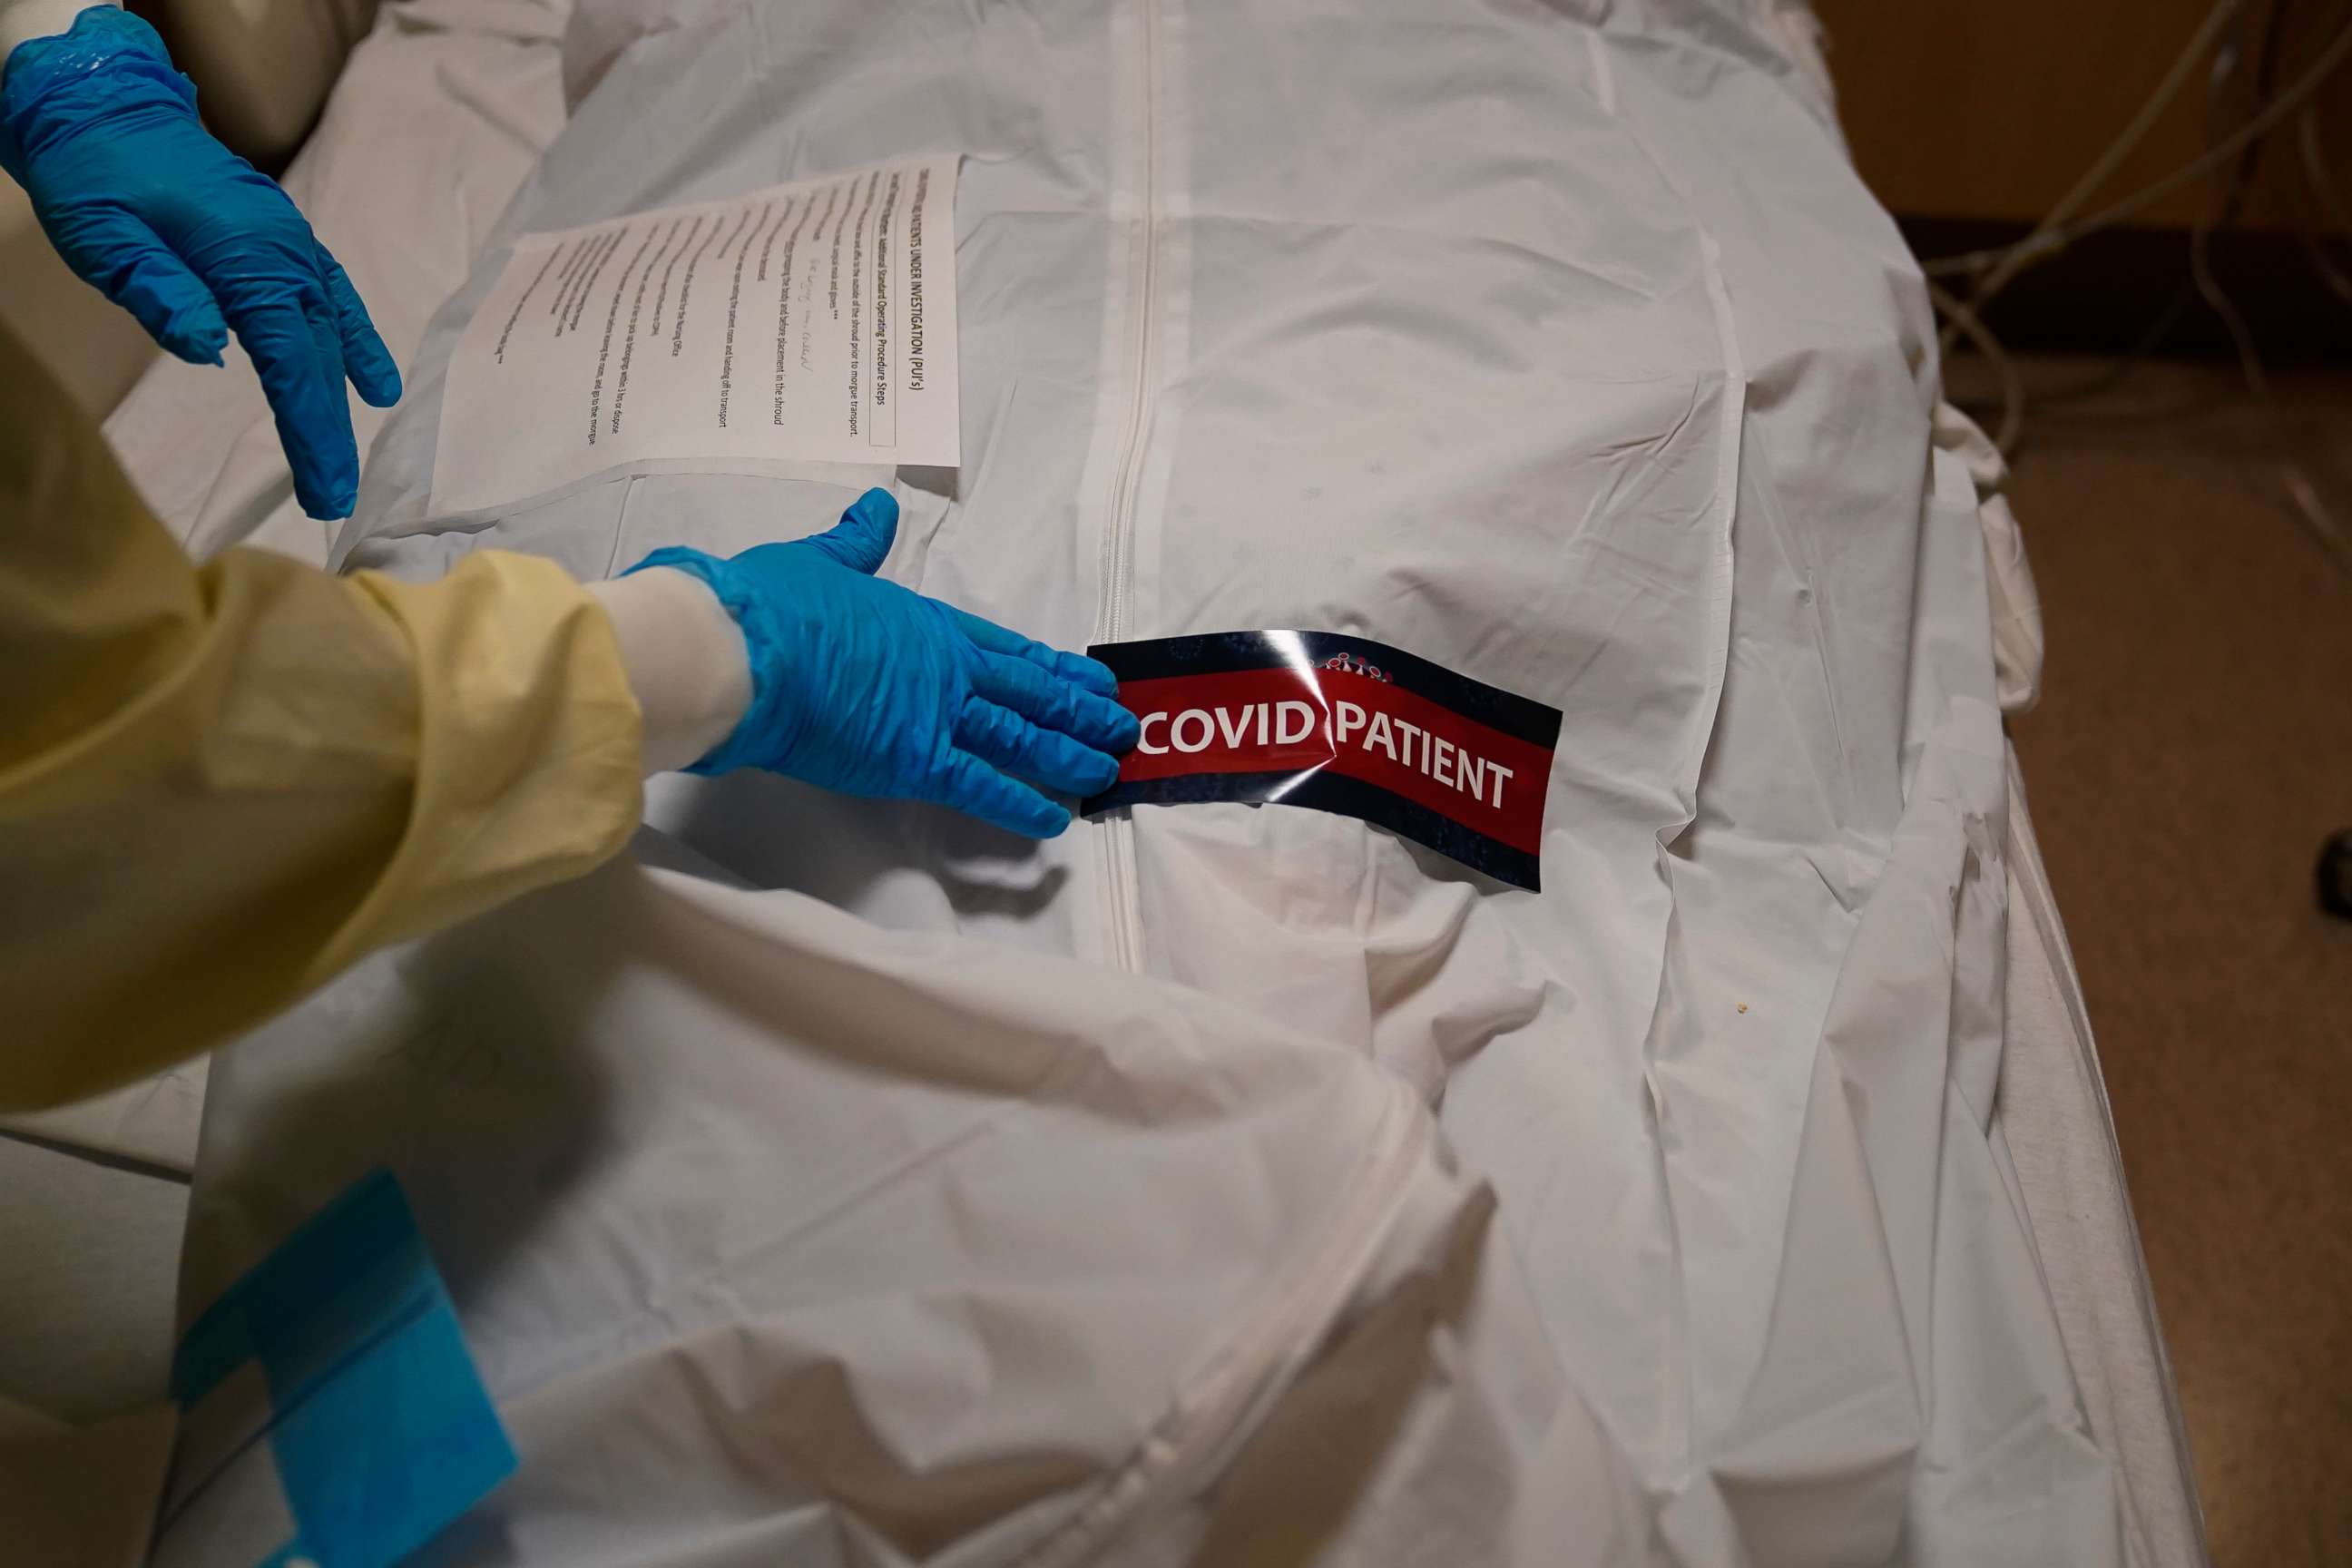 PHOTO: A health care worker places a "COVID Patient" sticker on a body bag holding a deceased patient at Providence Holy Cross Medical Center in the Mission Hills neighborhood of Los Angeles, California, on Jan. 9. 2021.